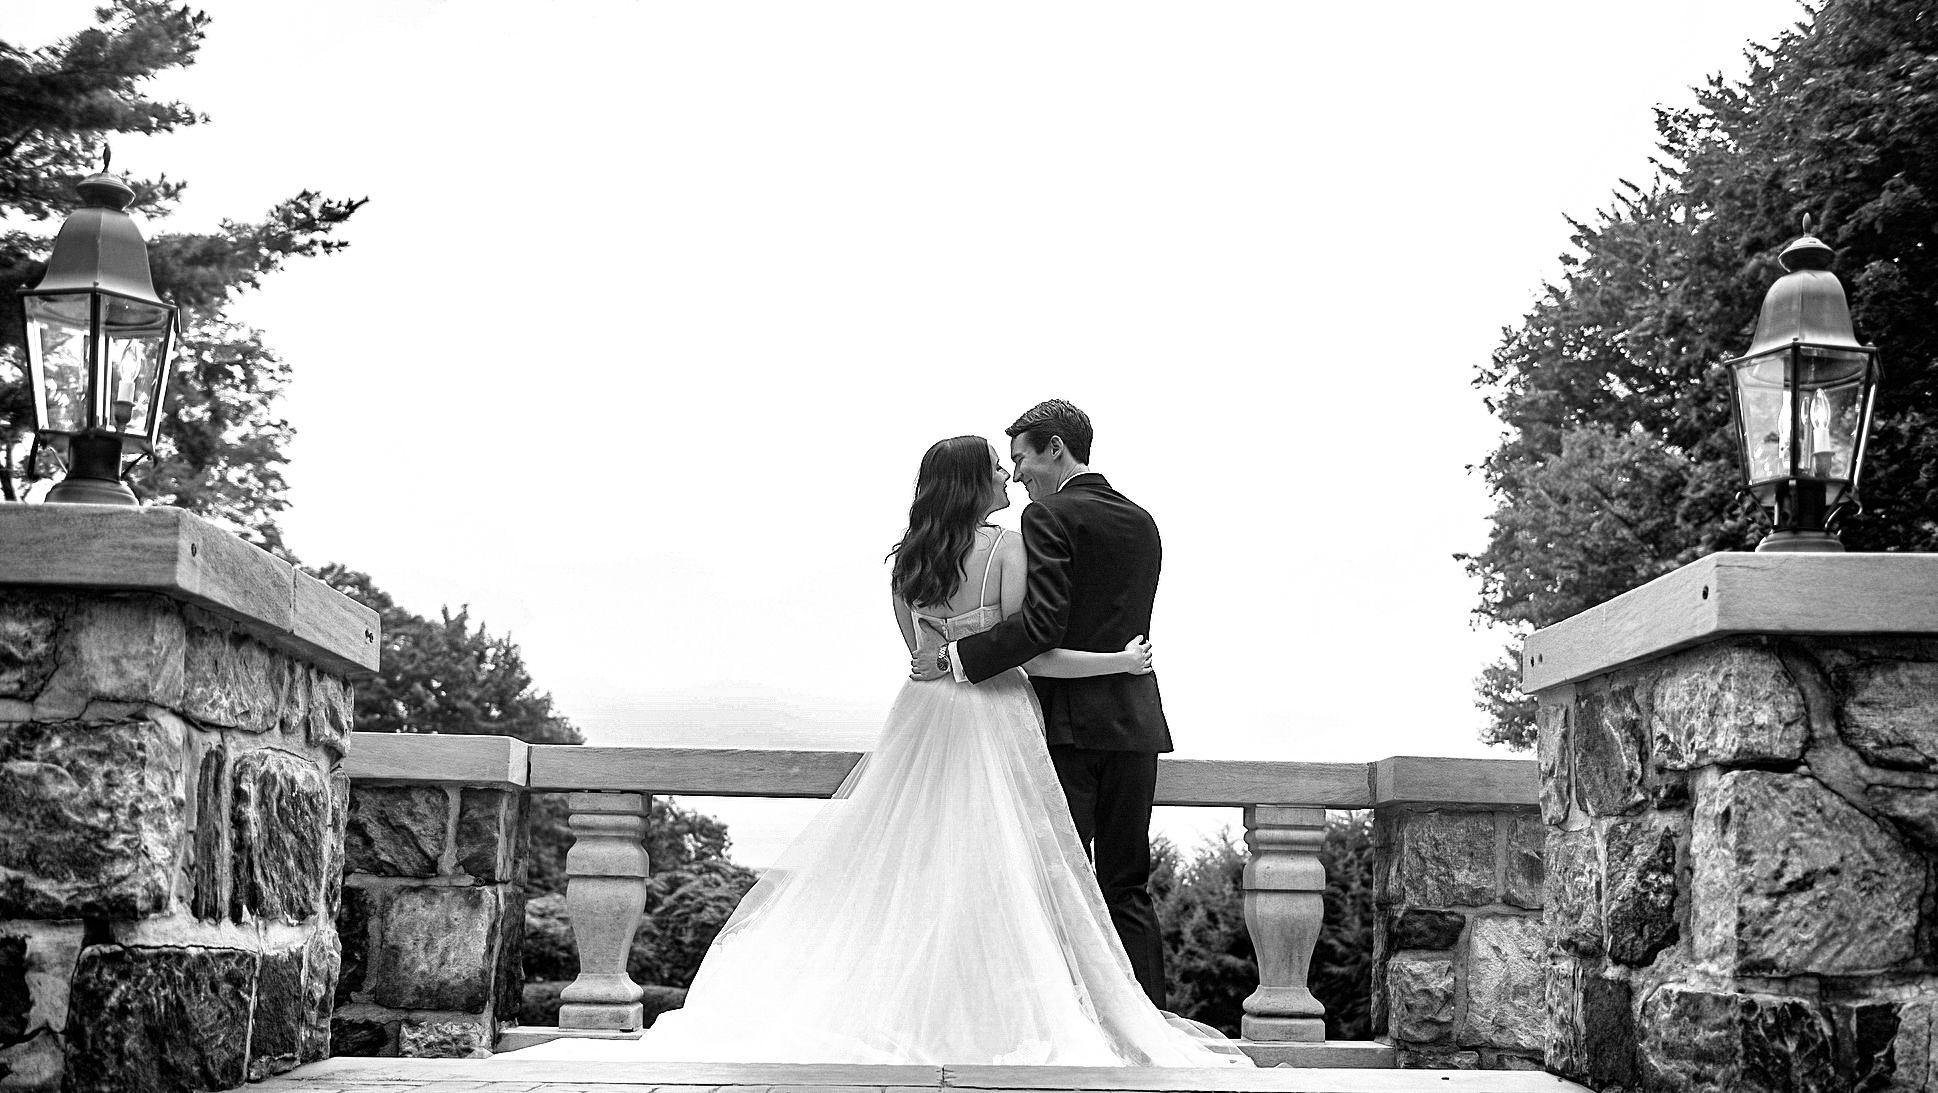 A Wedding Couple's First Look In Black and White